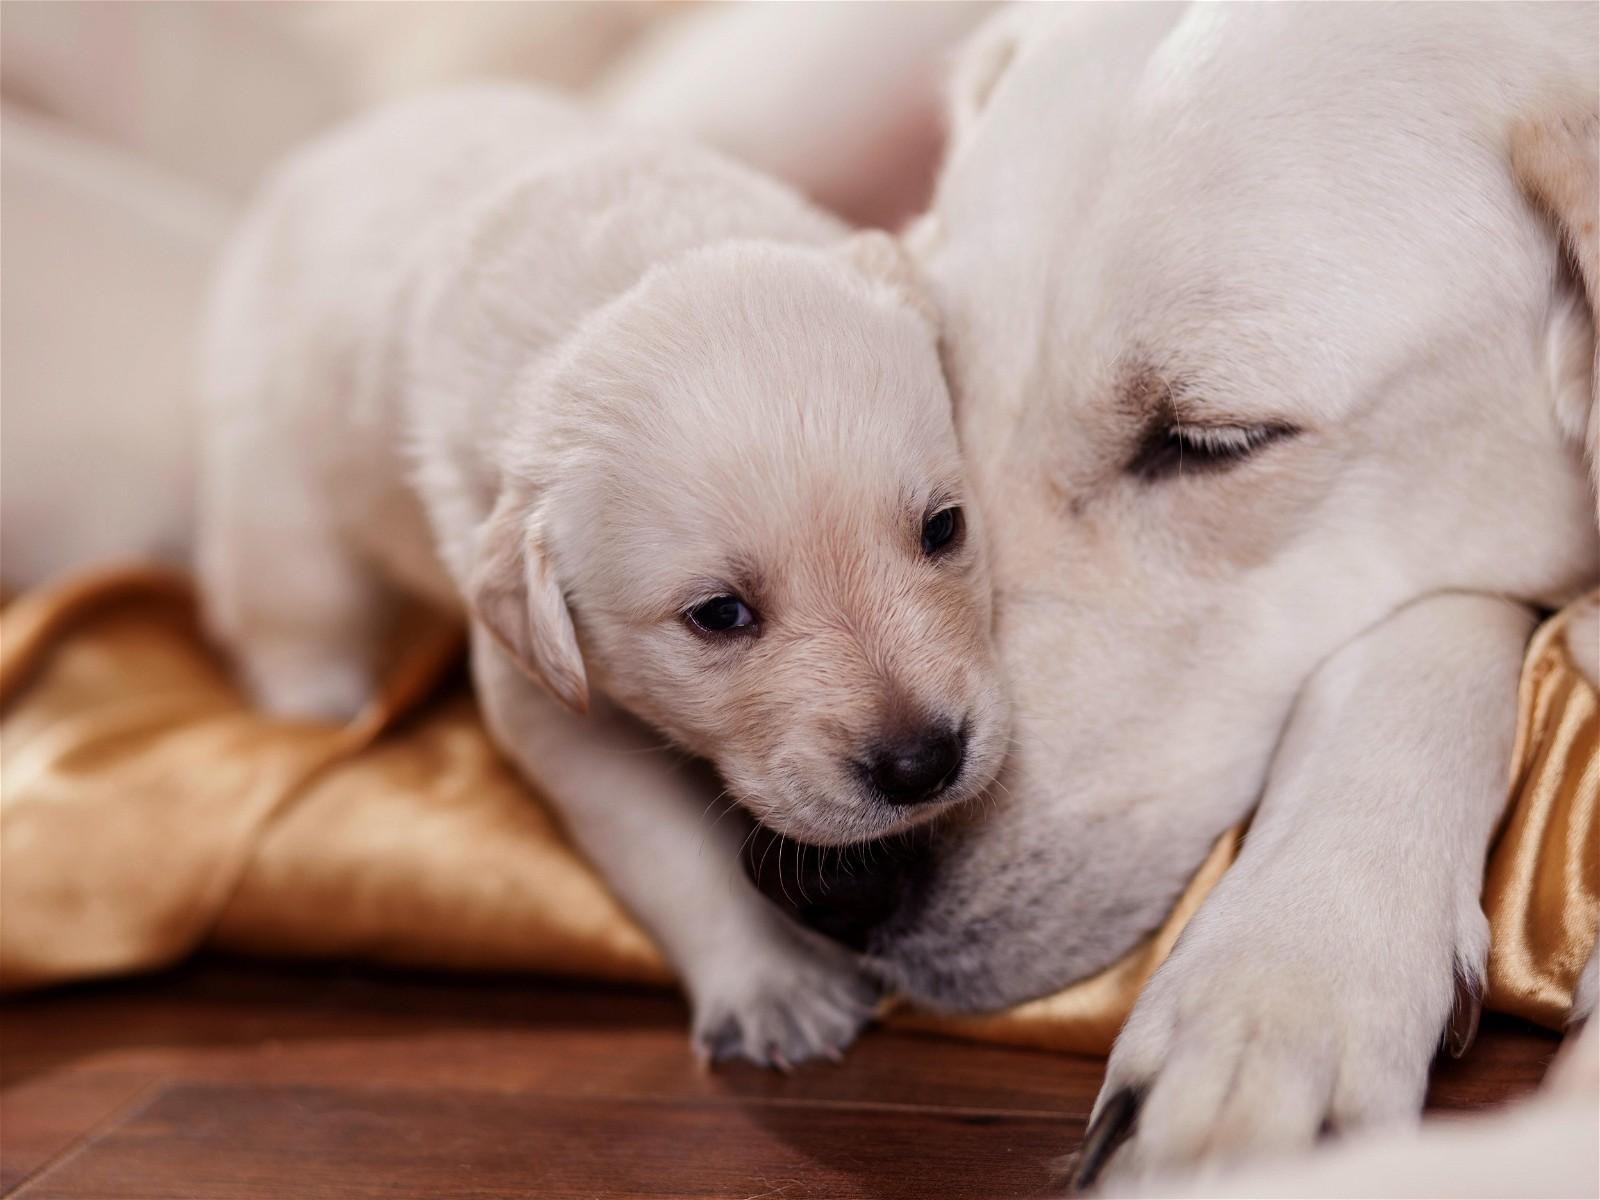 The 5 Secrets to Raising a Happy, Healthy Puppy